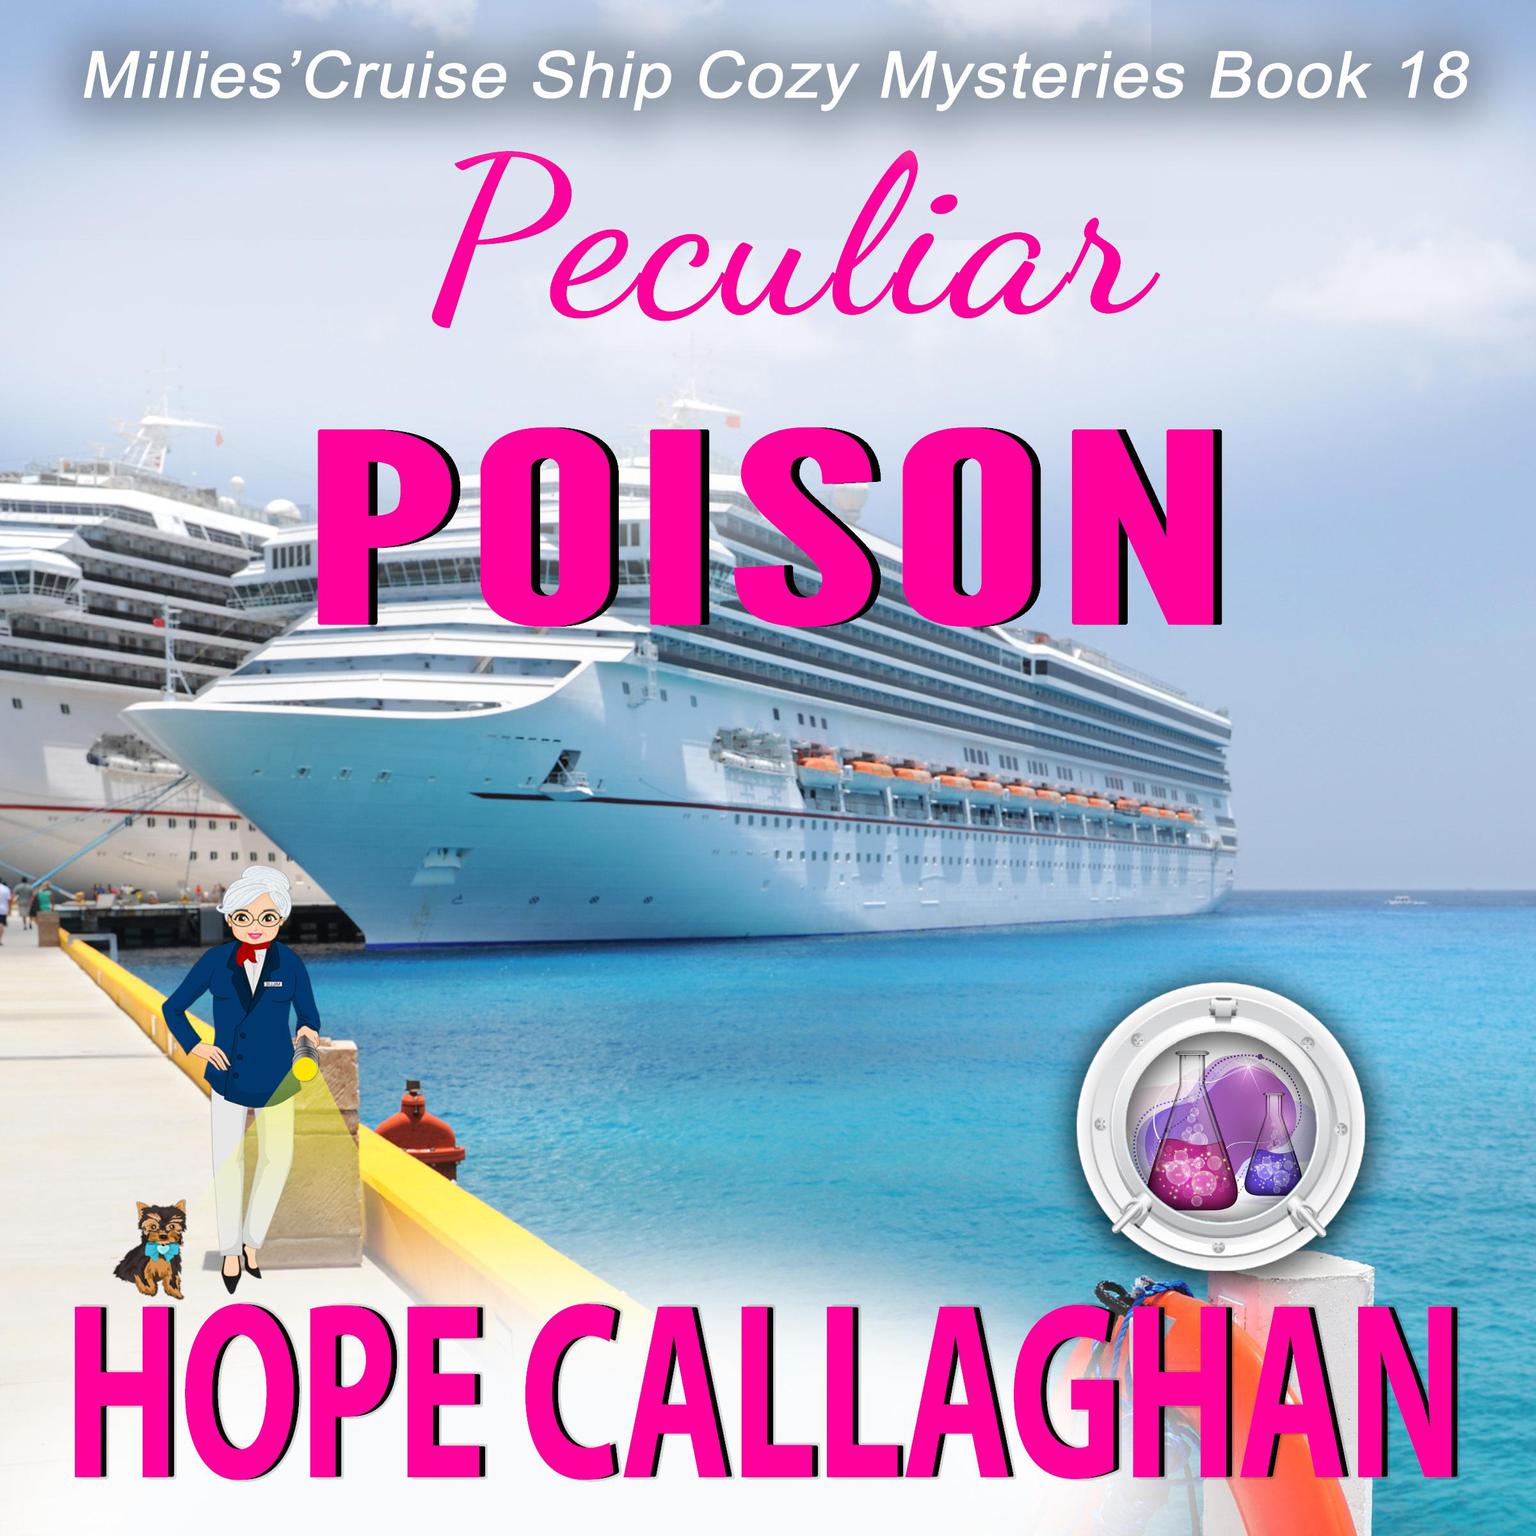 Peculiar Poison: Millies Cruise Ship Mysteries Book 18 Audiobook, by Hope Callaghan